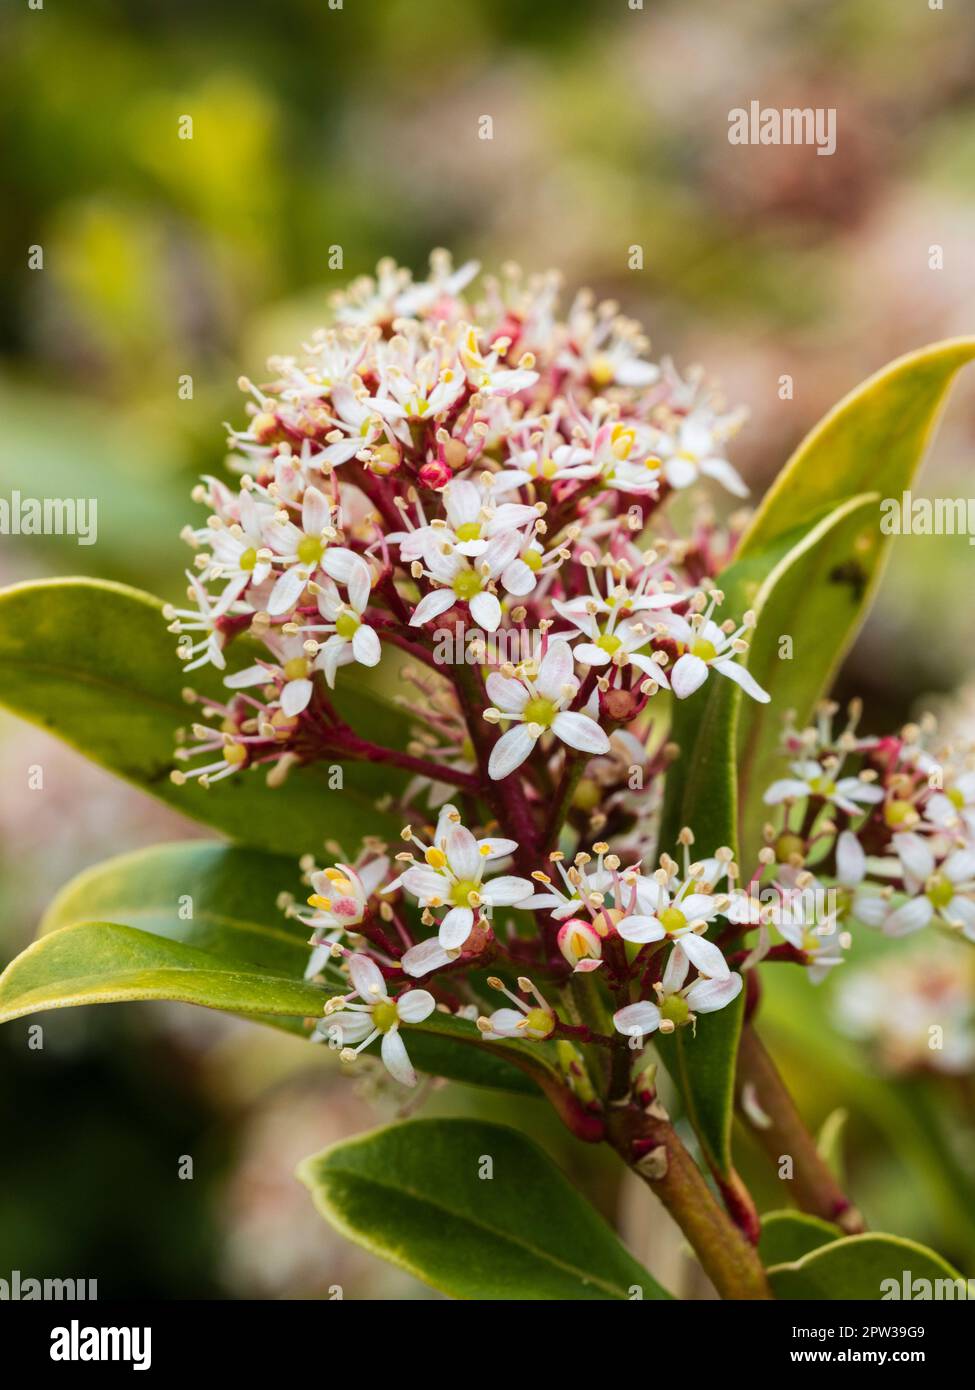 Single flower head of the spring flowering evergreen shrub, Skimmia japonica 'Ruby Dome' Stock Photo